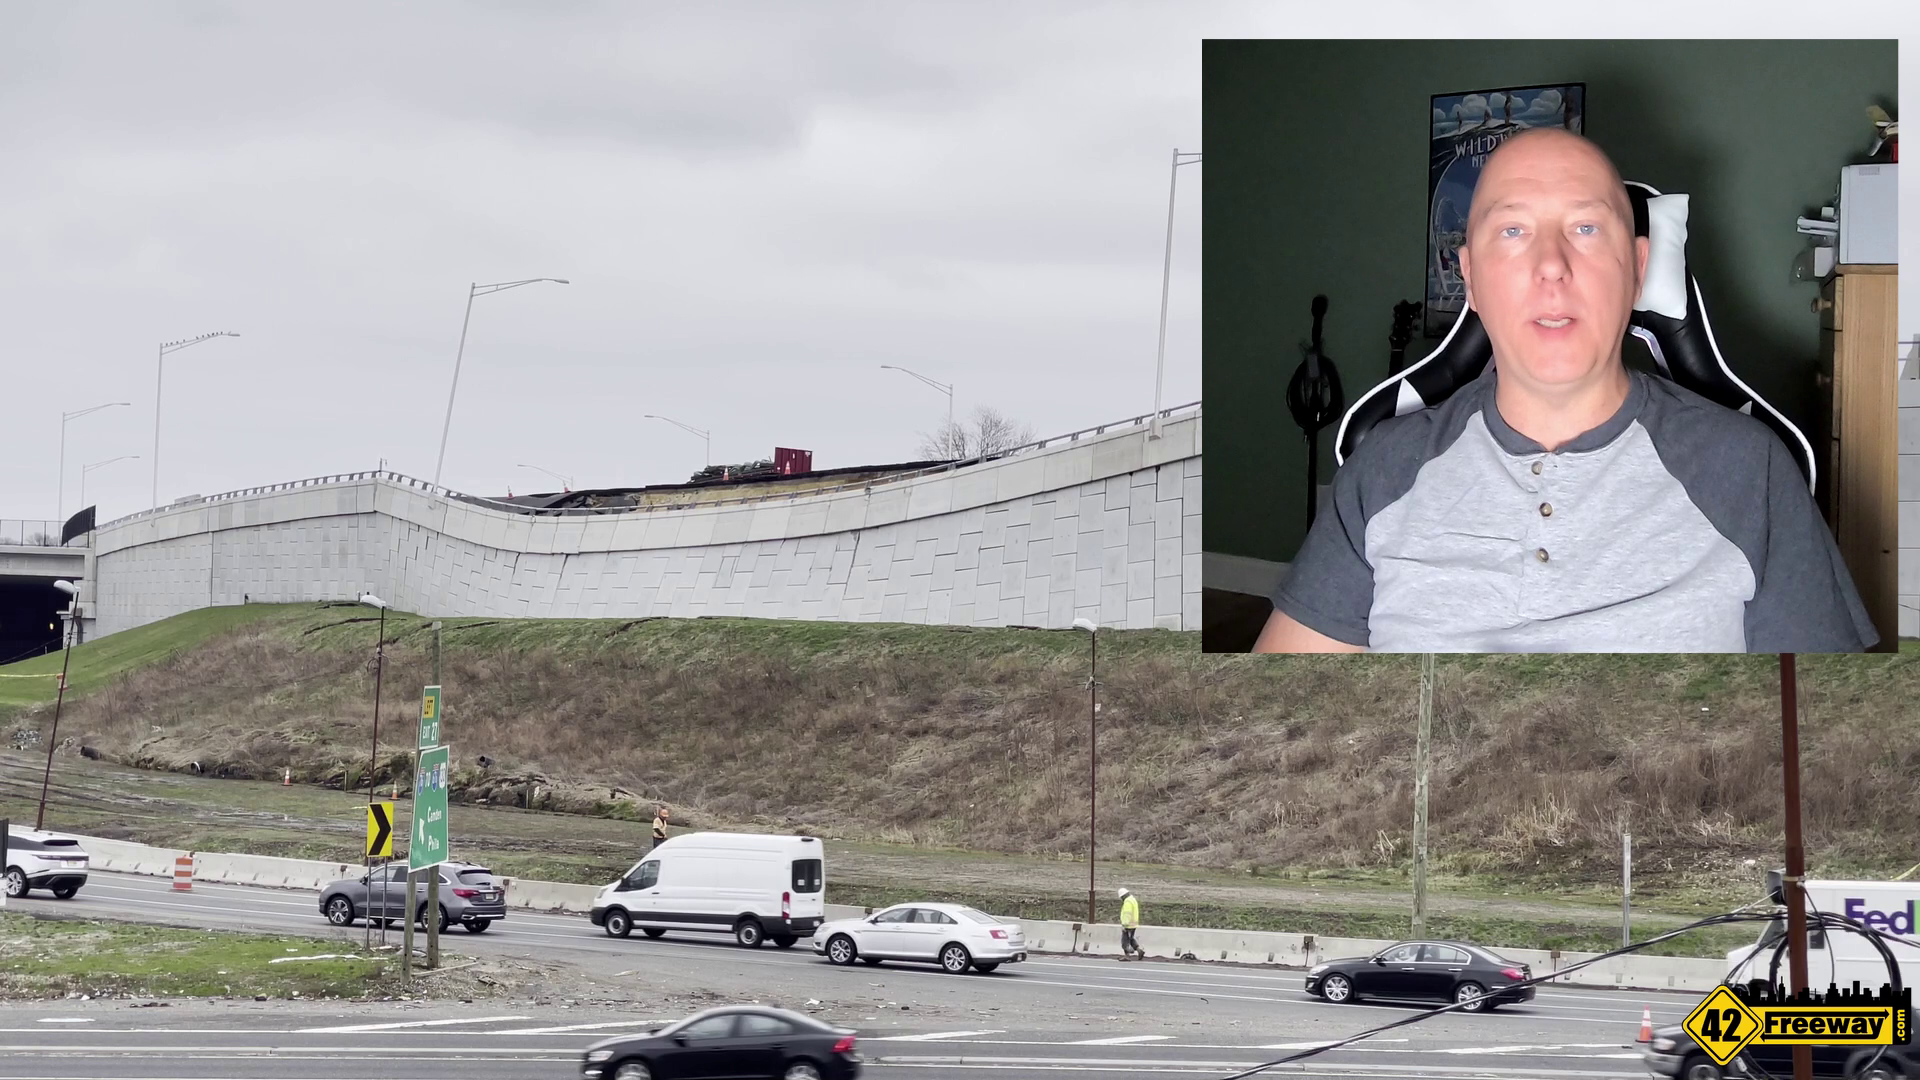 Direct Connect 295 42 Bellmawr Wall Roadway Sinking Analysis Video Theory And Hey Njdot Whats Up 42 Freeway